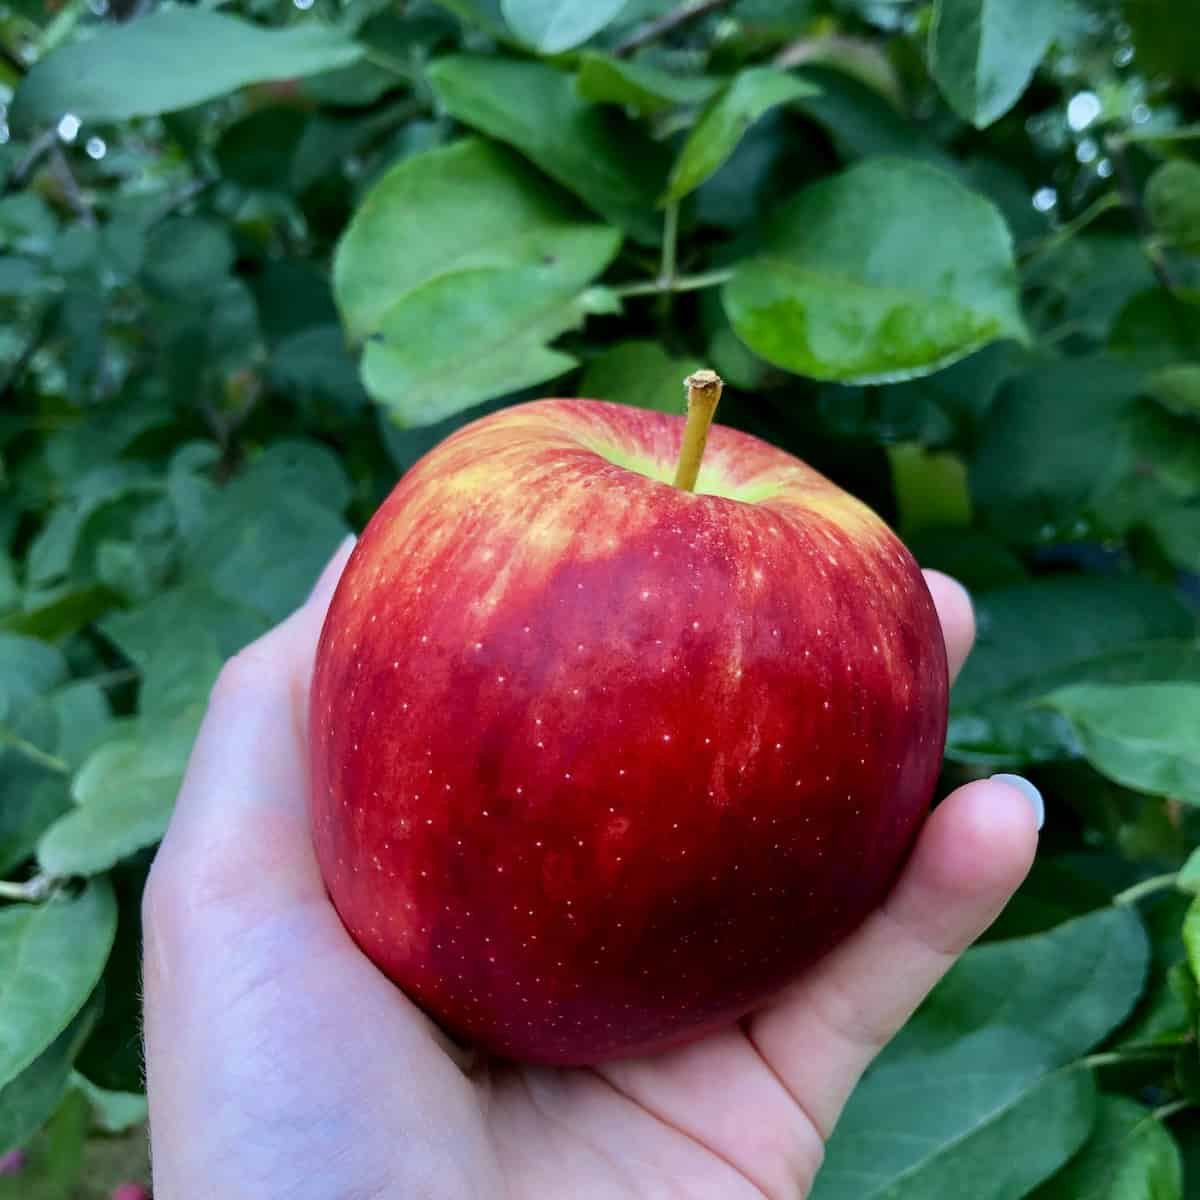 Lovely ripe red apple held in a hand in the backyard